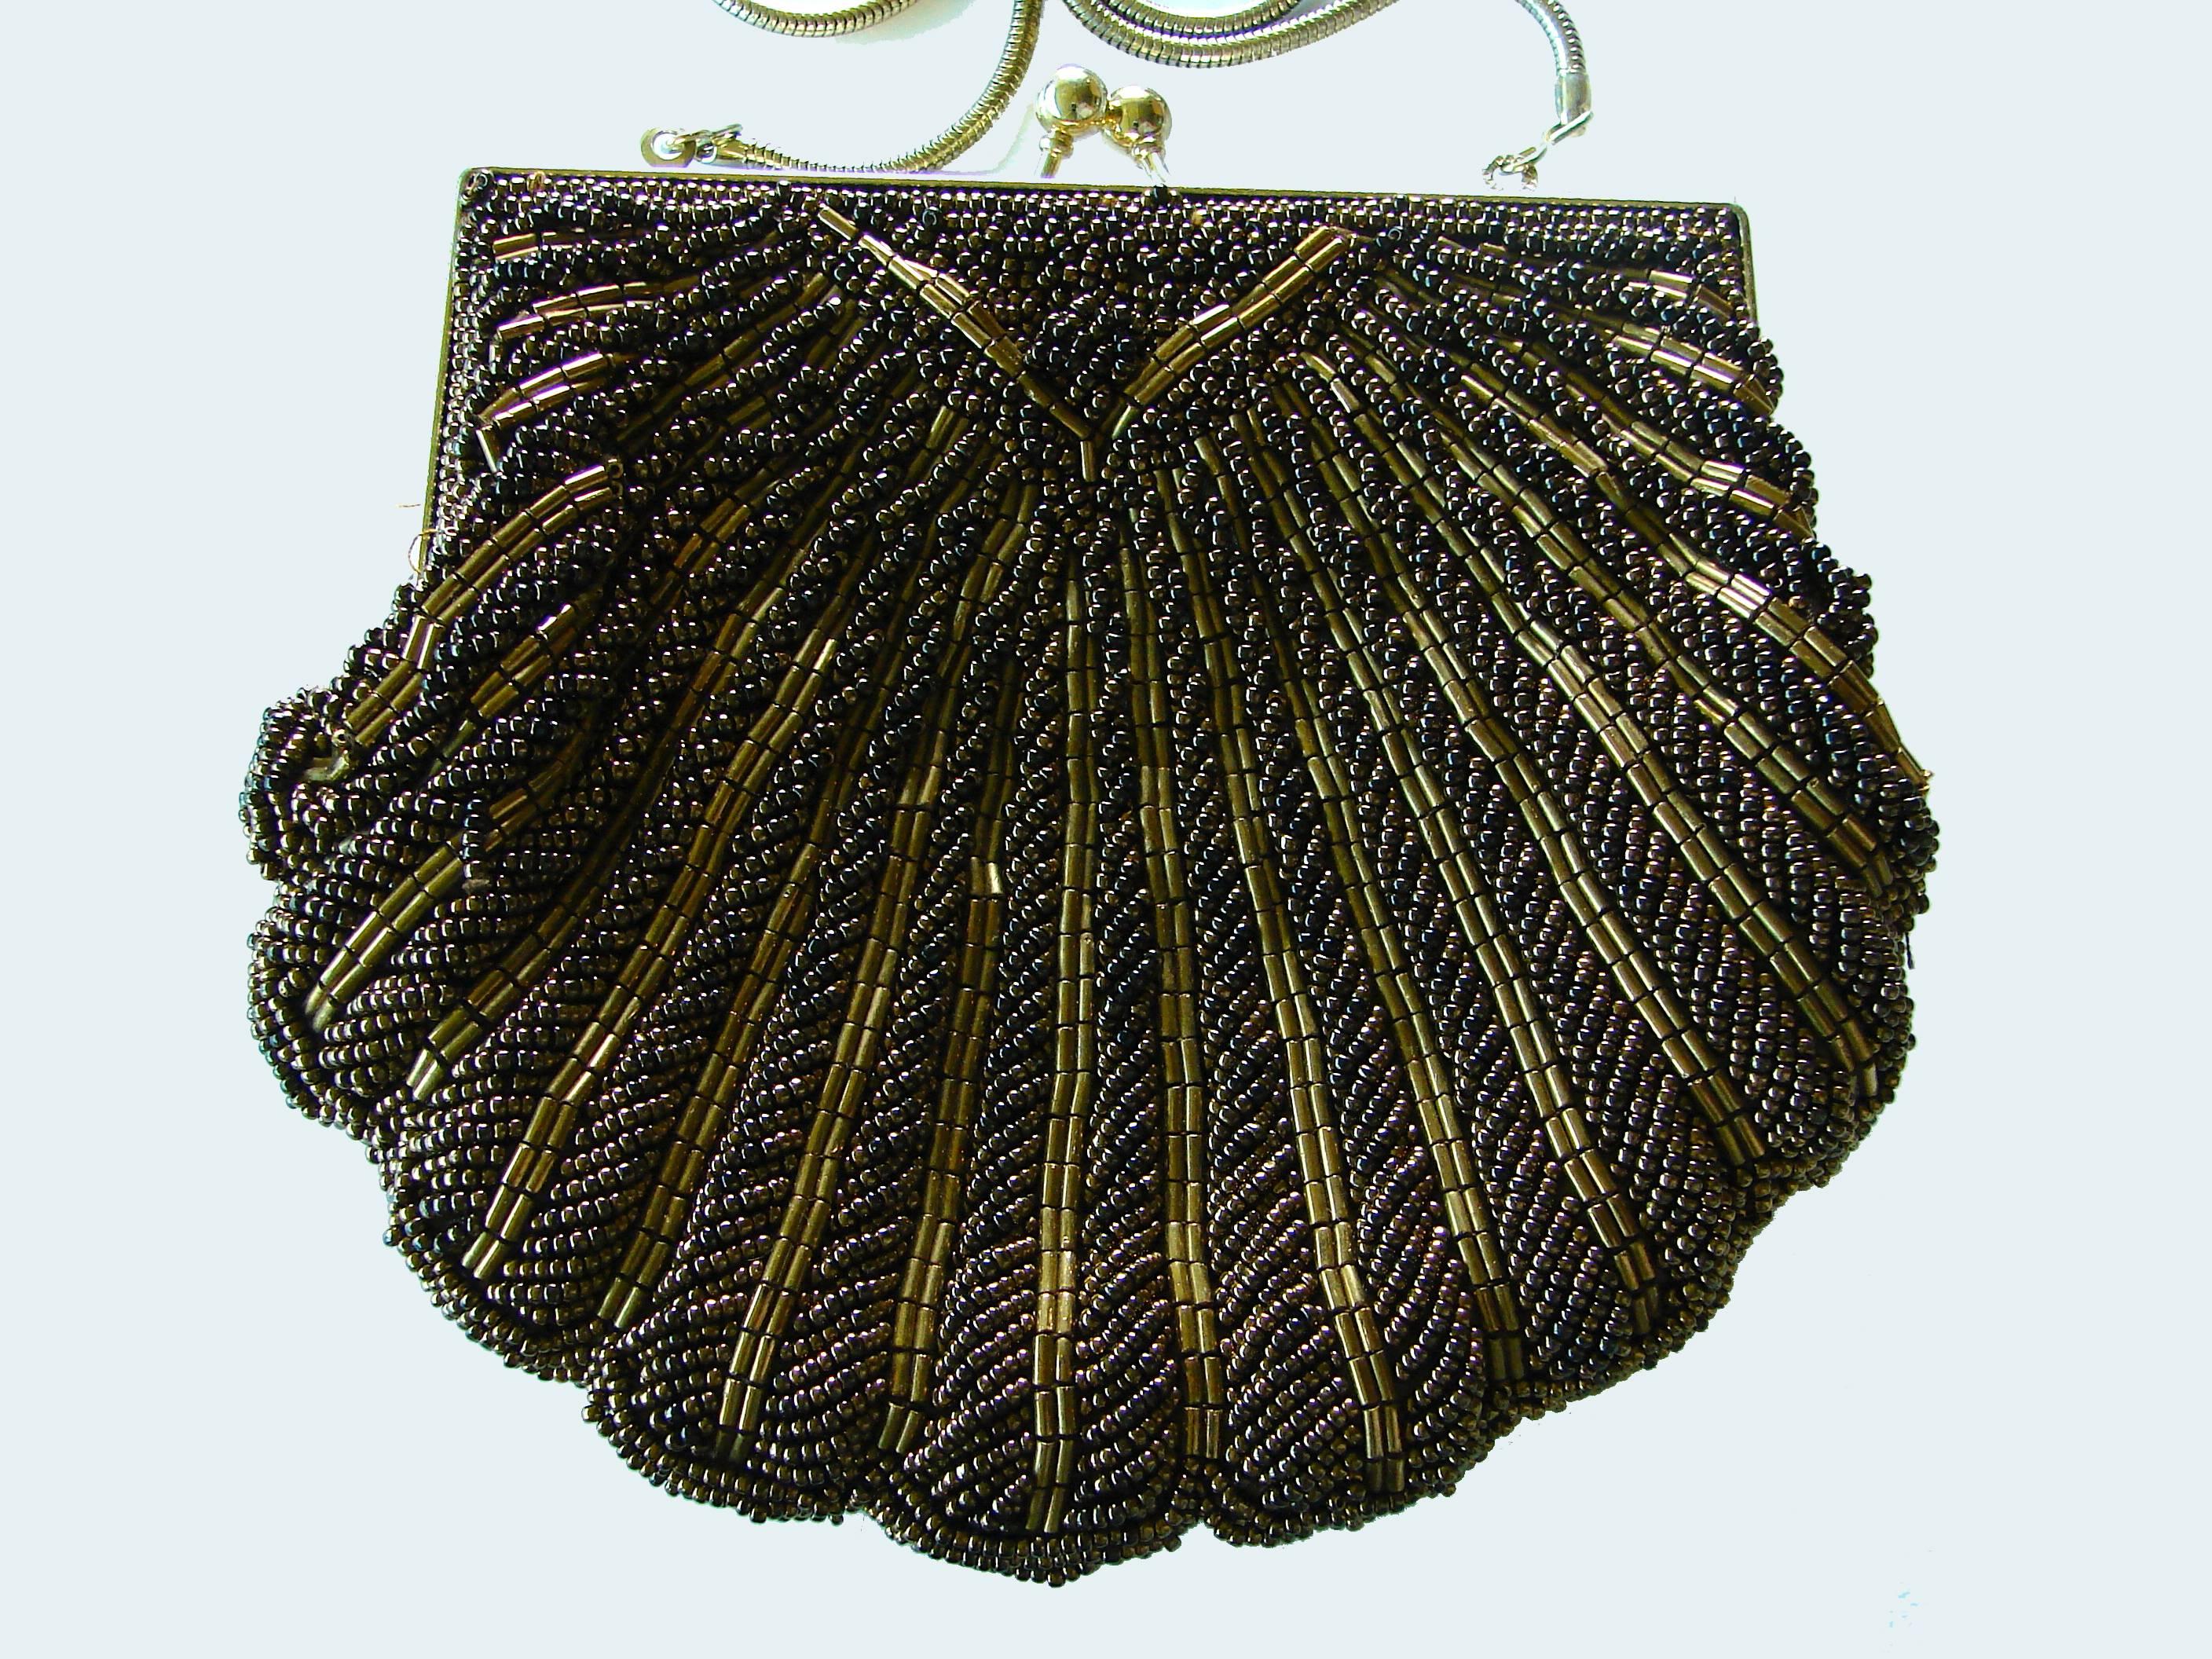 Women's Exquisite Walborg Beaded Kisslock Evening Bag with Silk Satin Lining 1970s 